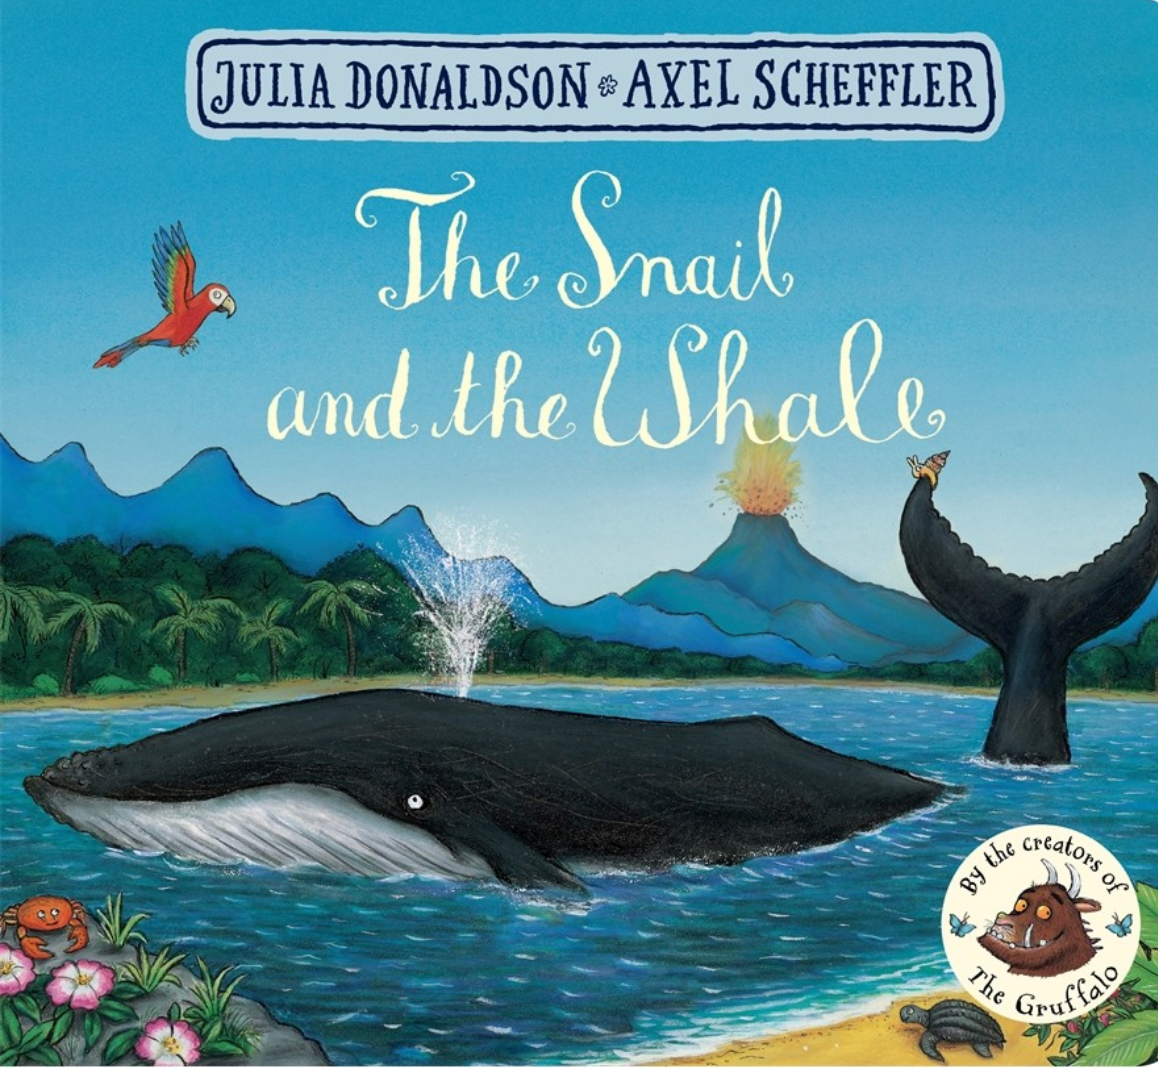 The Snail And the Whale